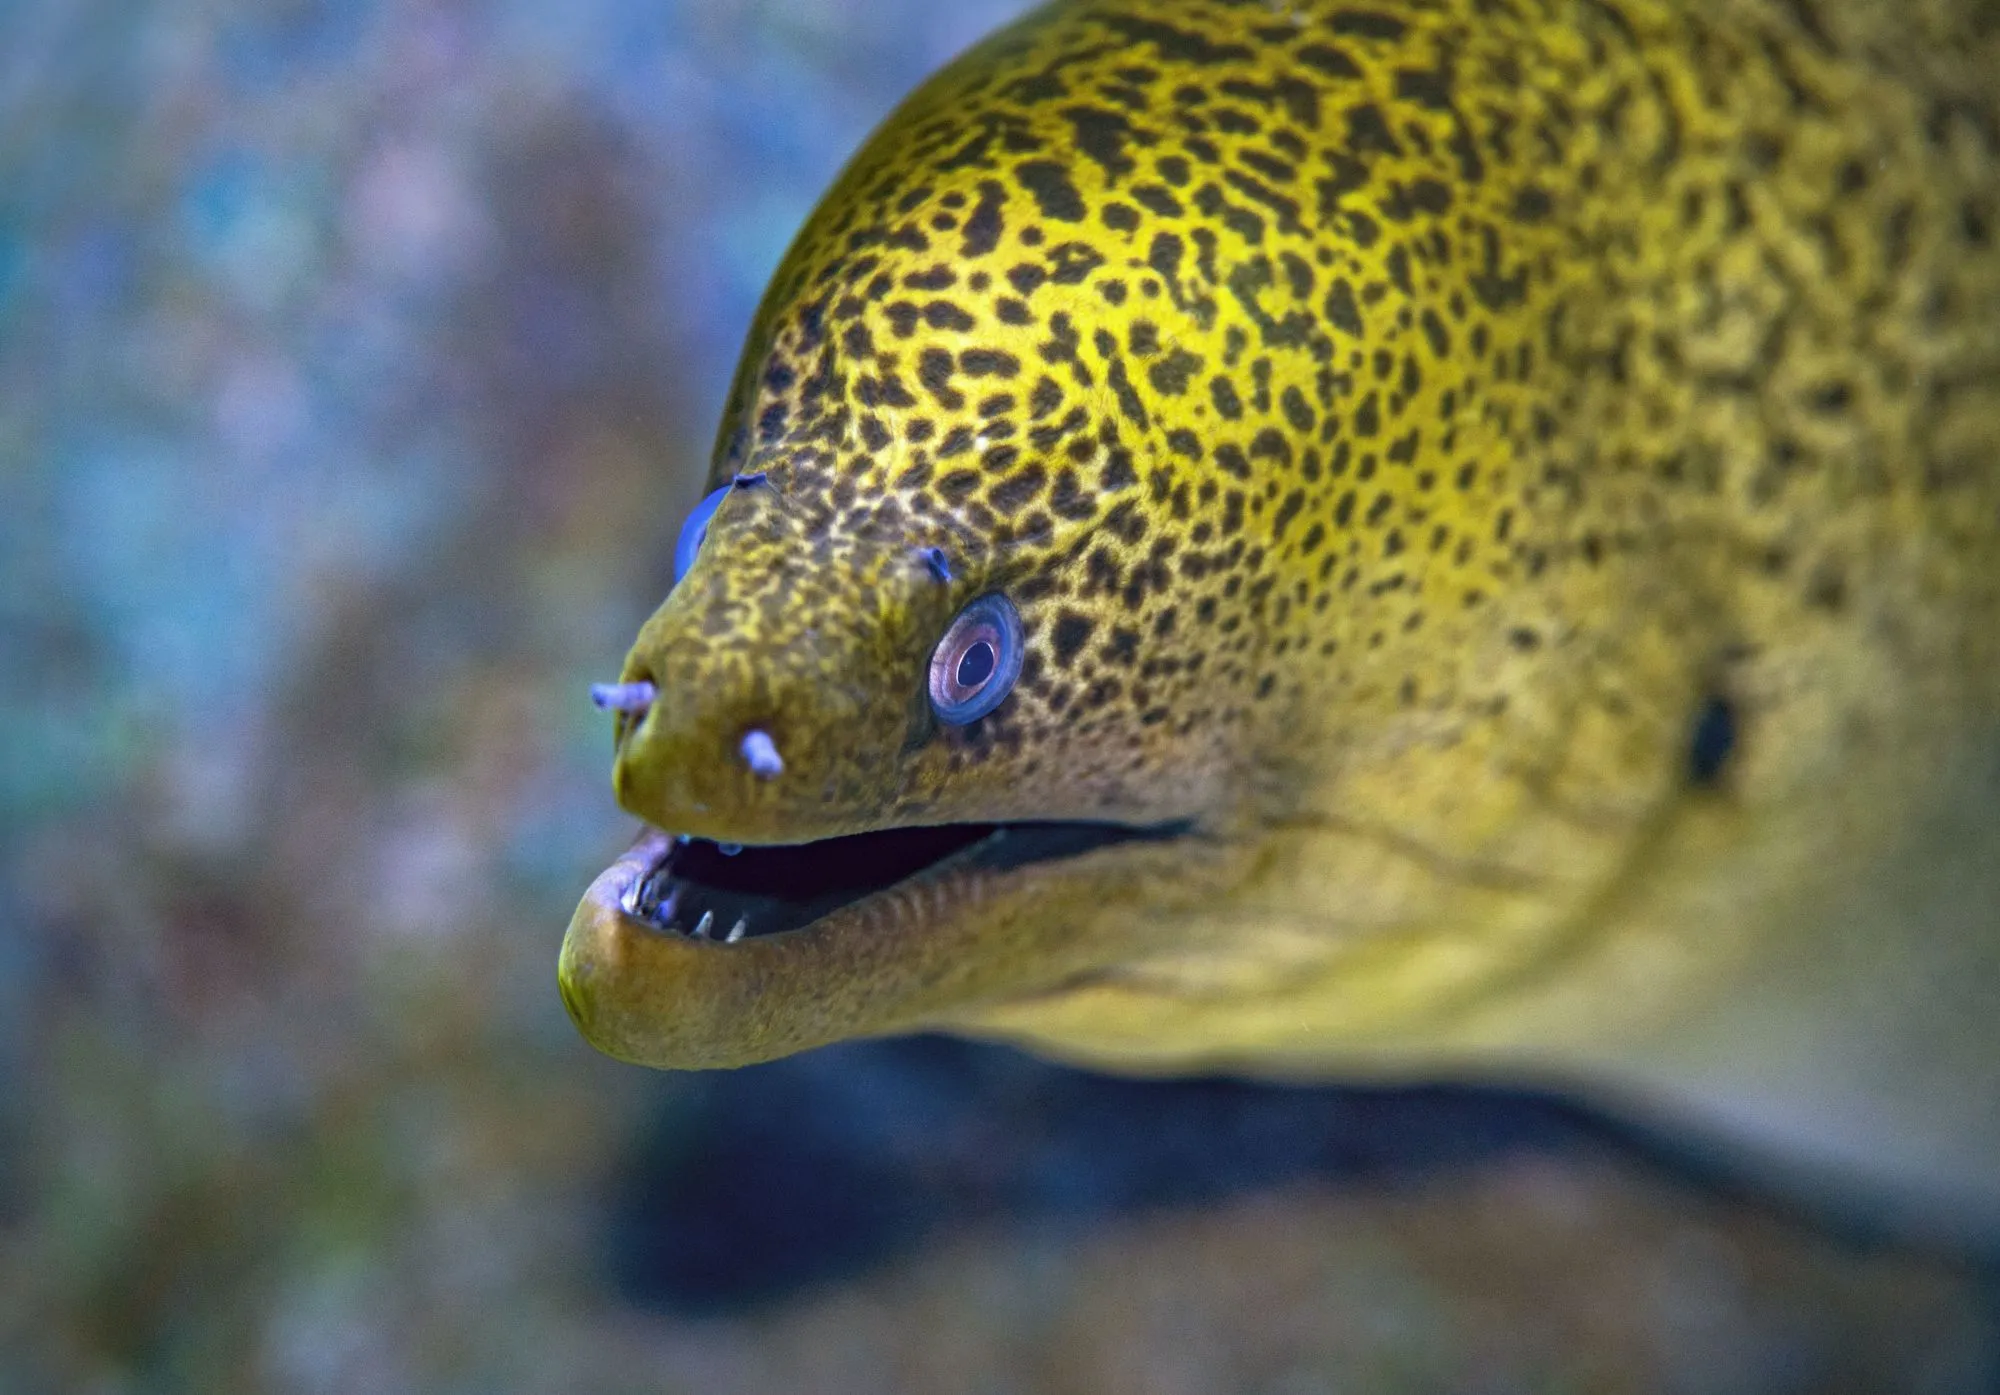 Here are some facts about the cute eel.